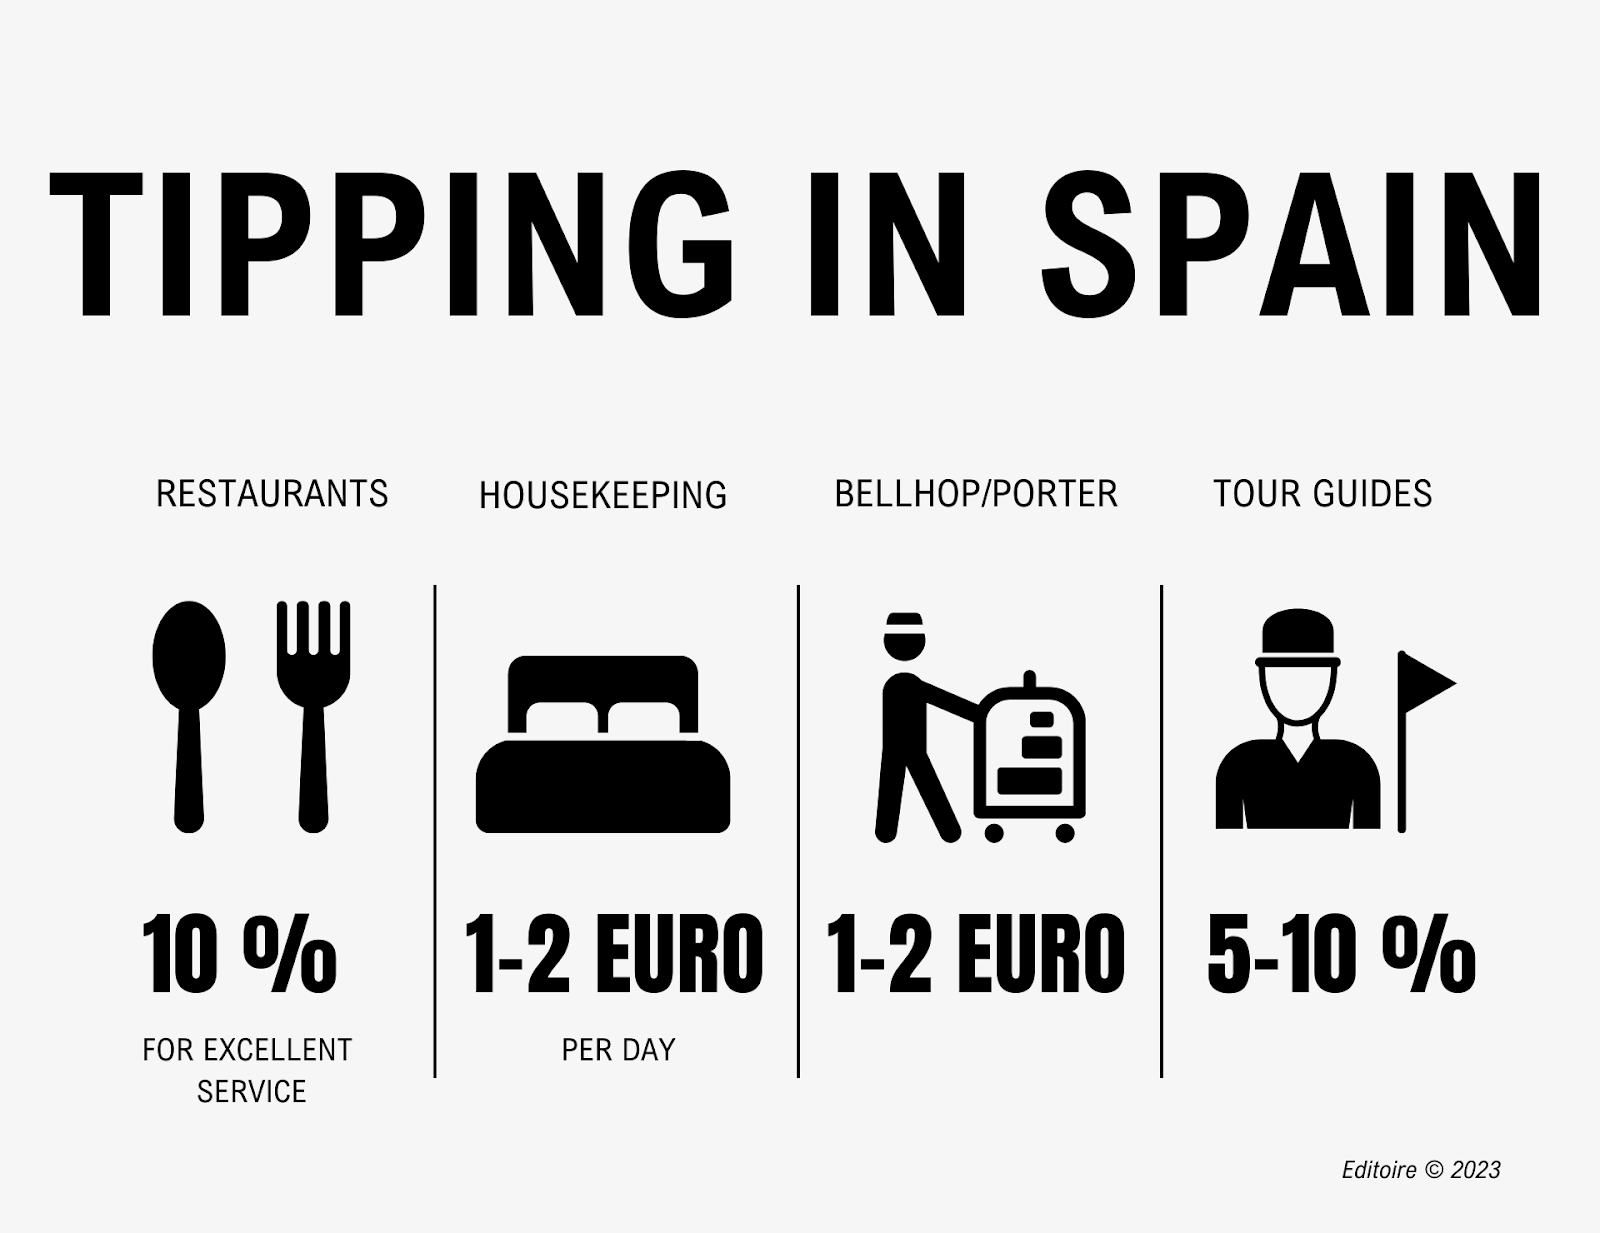 Informational image about tipping rules in Spain. 